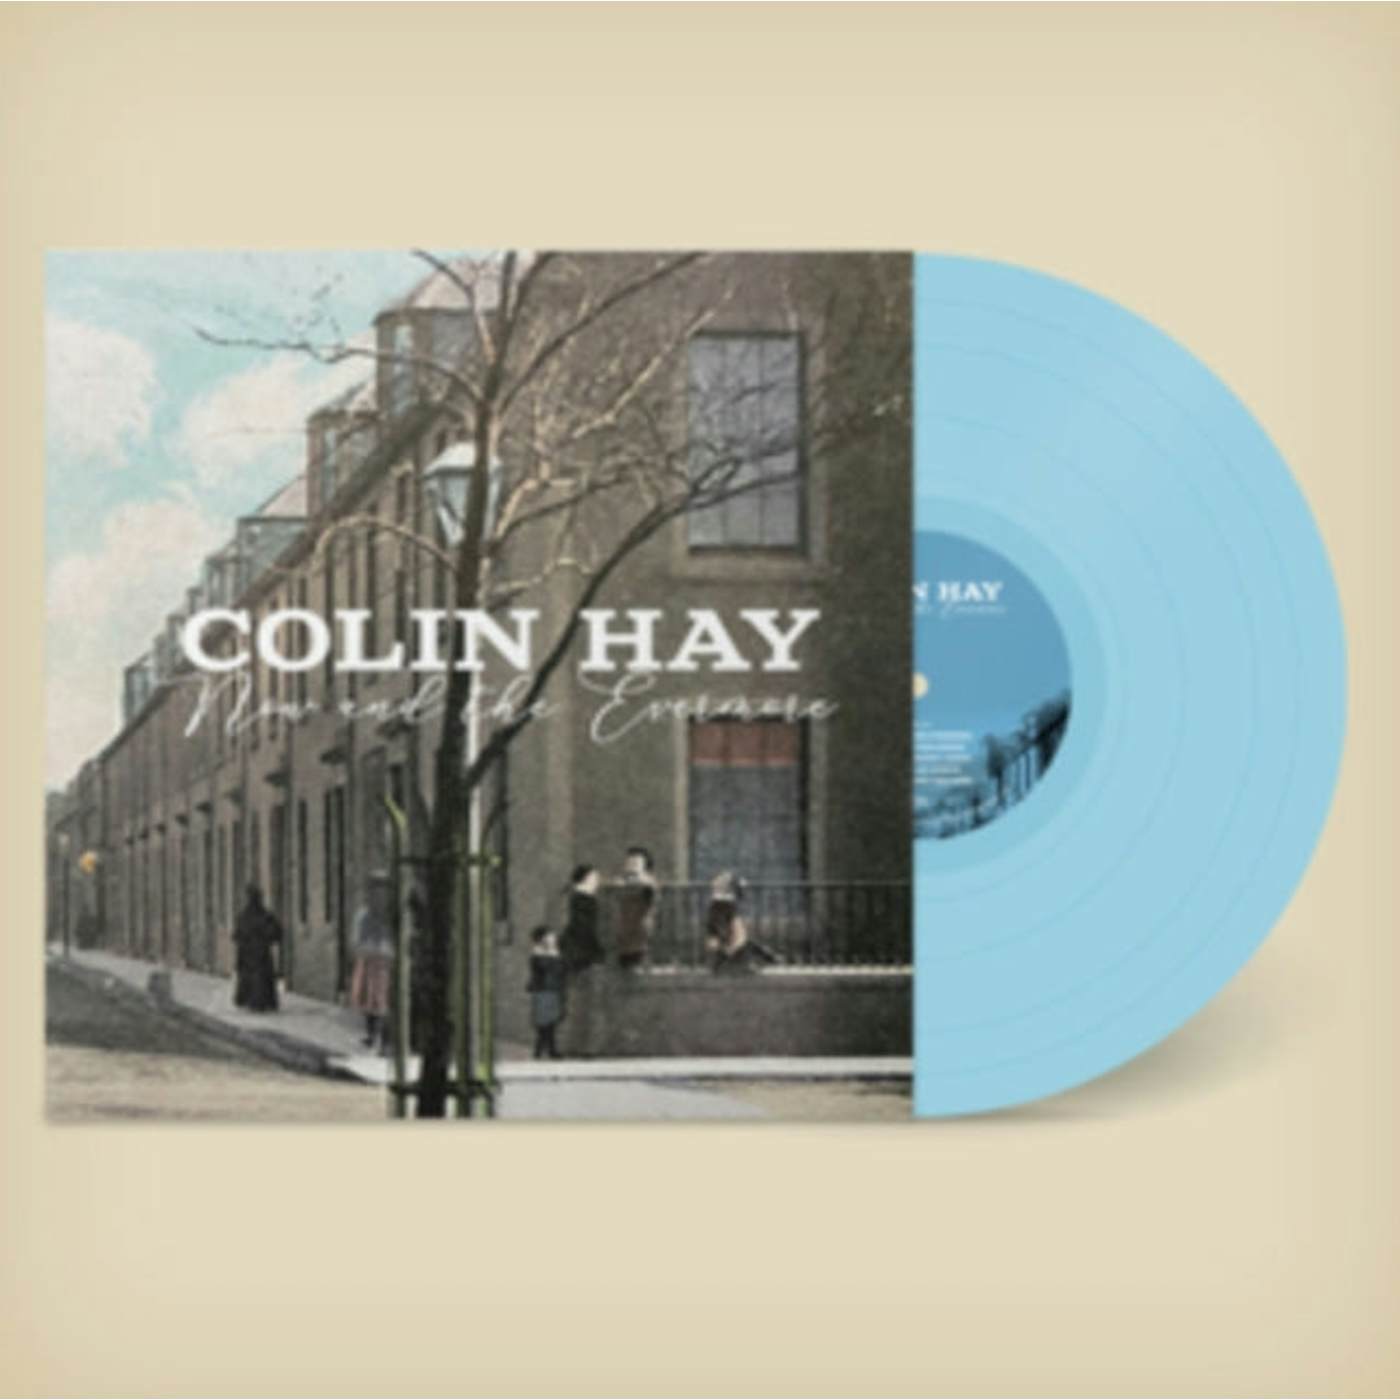 Colin Hay LP Vinyl Record - Now And The Evermore